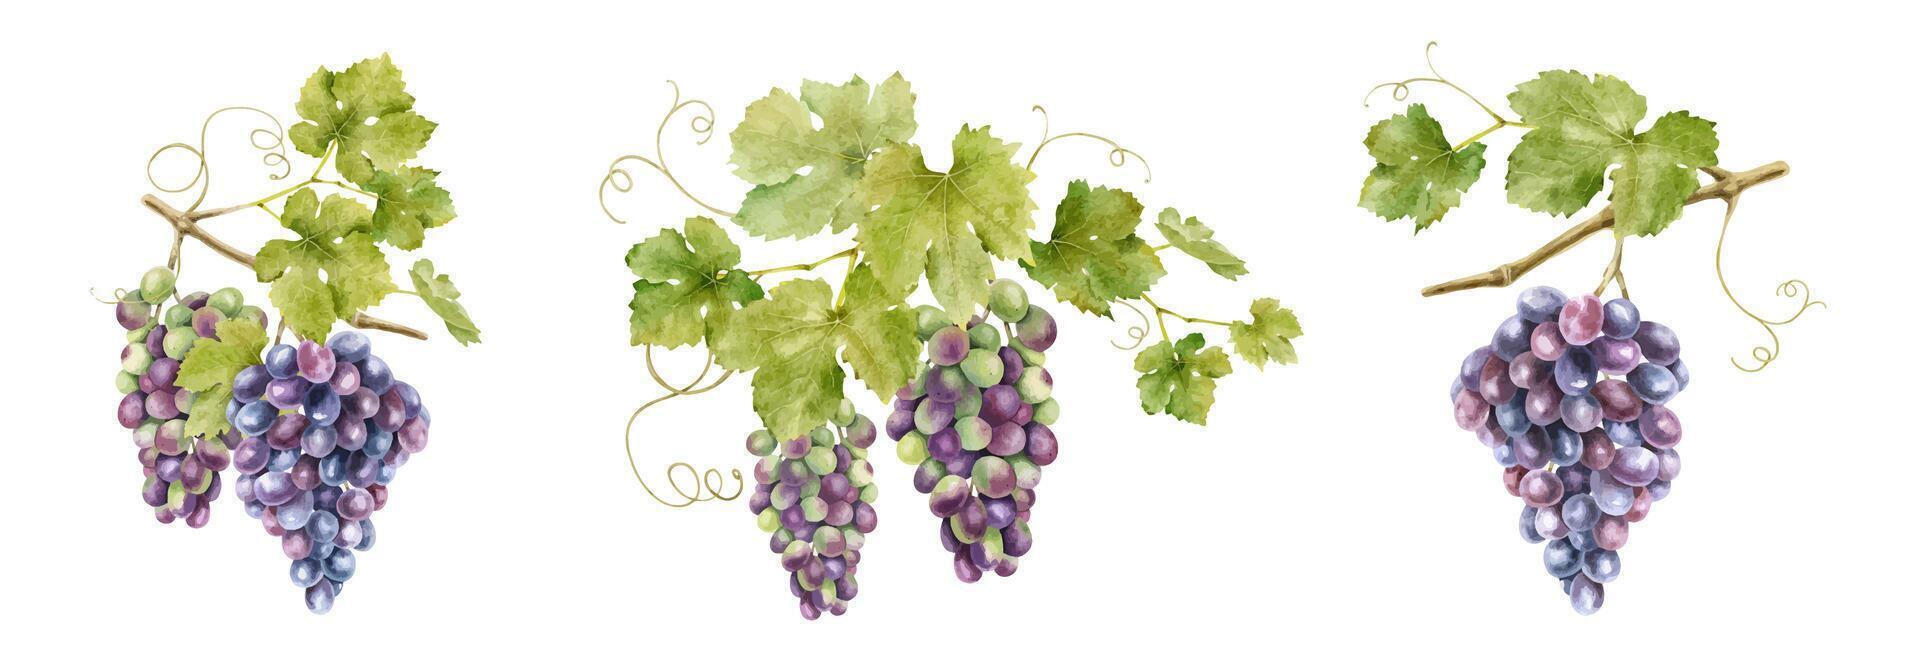 Set of bunches of red grapes with leaves. Isolated watercolor illustrations. Grapevines for the design of labels of wine, grape juice and cosmetics, wedding cards, stationery, greetings cards vector